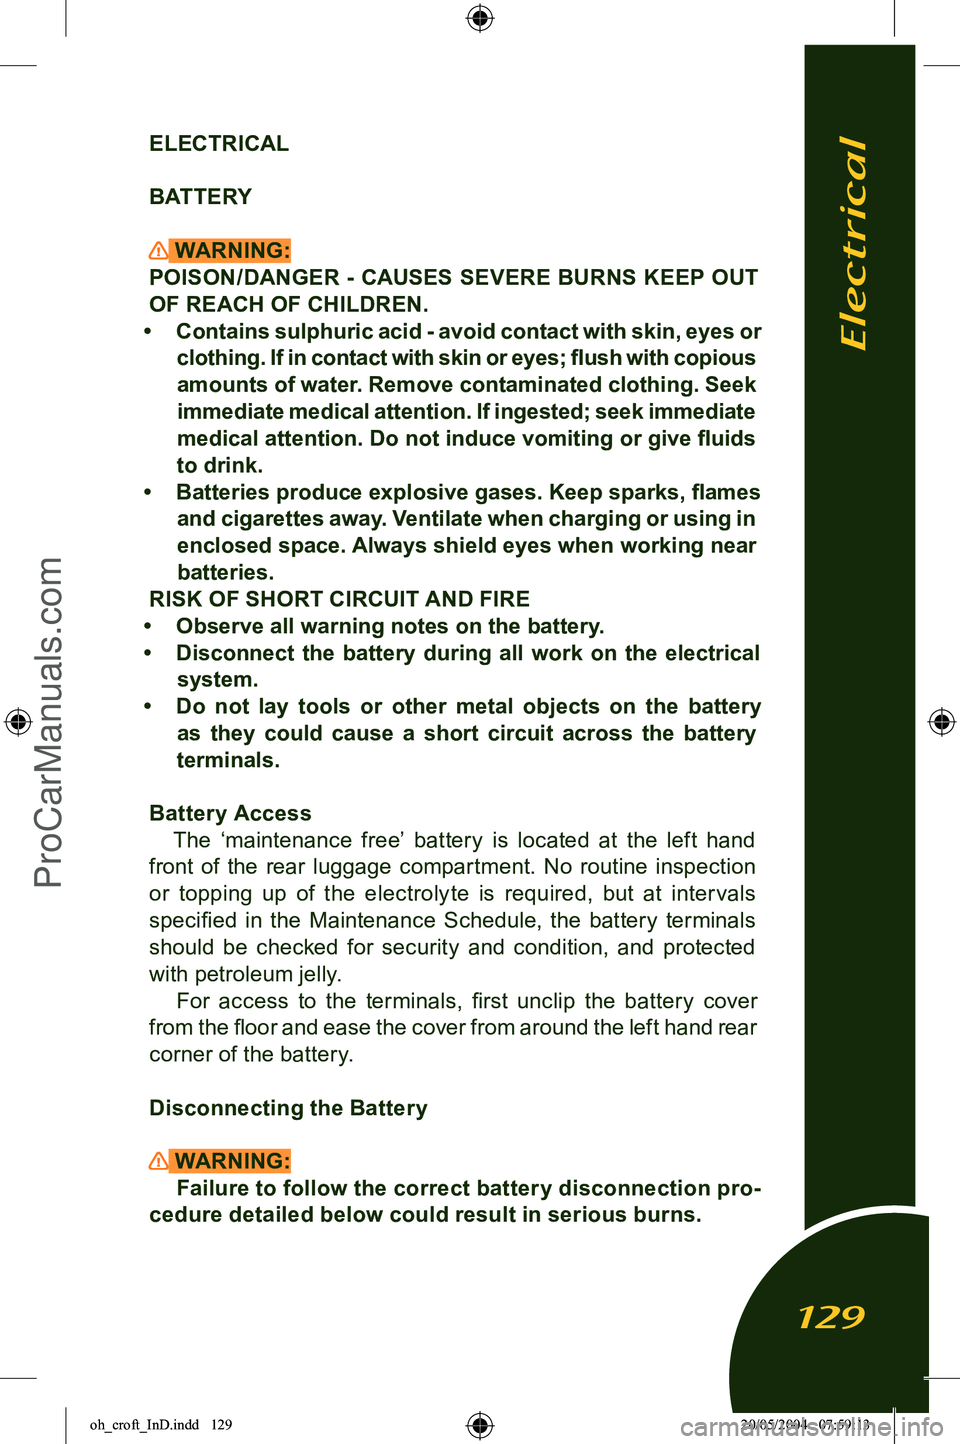 LOTUS ELISE 2005 Owners Guide 
ELECTRICAL
BATTERY
 WARNING:
POISON/DANGER  -  CAUSES  SEVERE  BURNS  KEEP  OUT 
OF REACH OF CHILDREN.
•  Contains sulphuric acid - avoid contact with skin, eyes or  clothing. If in contact with sk